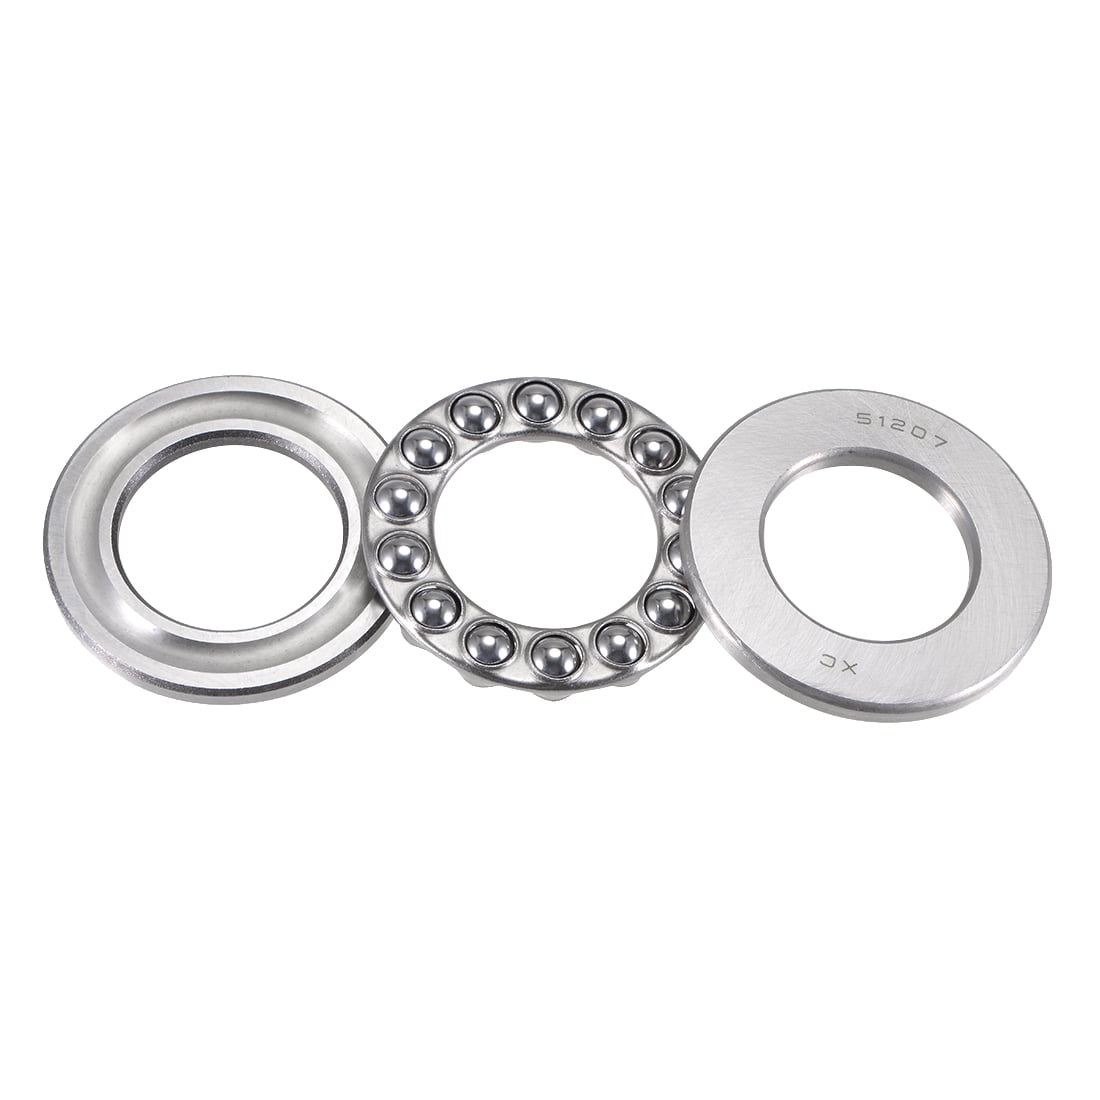 uxcell 51207 Thrust Ball Bearings 35mm x 62mm x 18mm Carbon Steel One-Way Rolling Direction